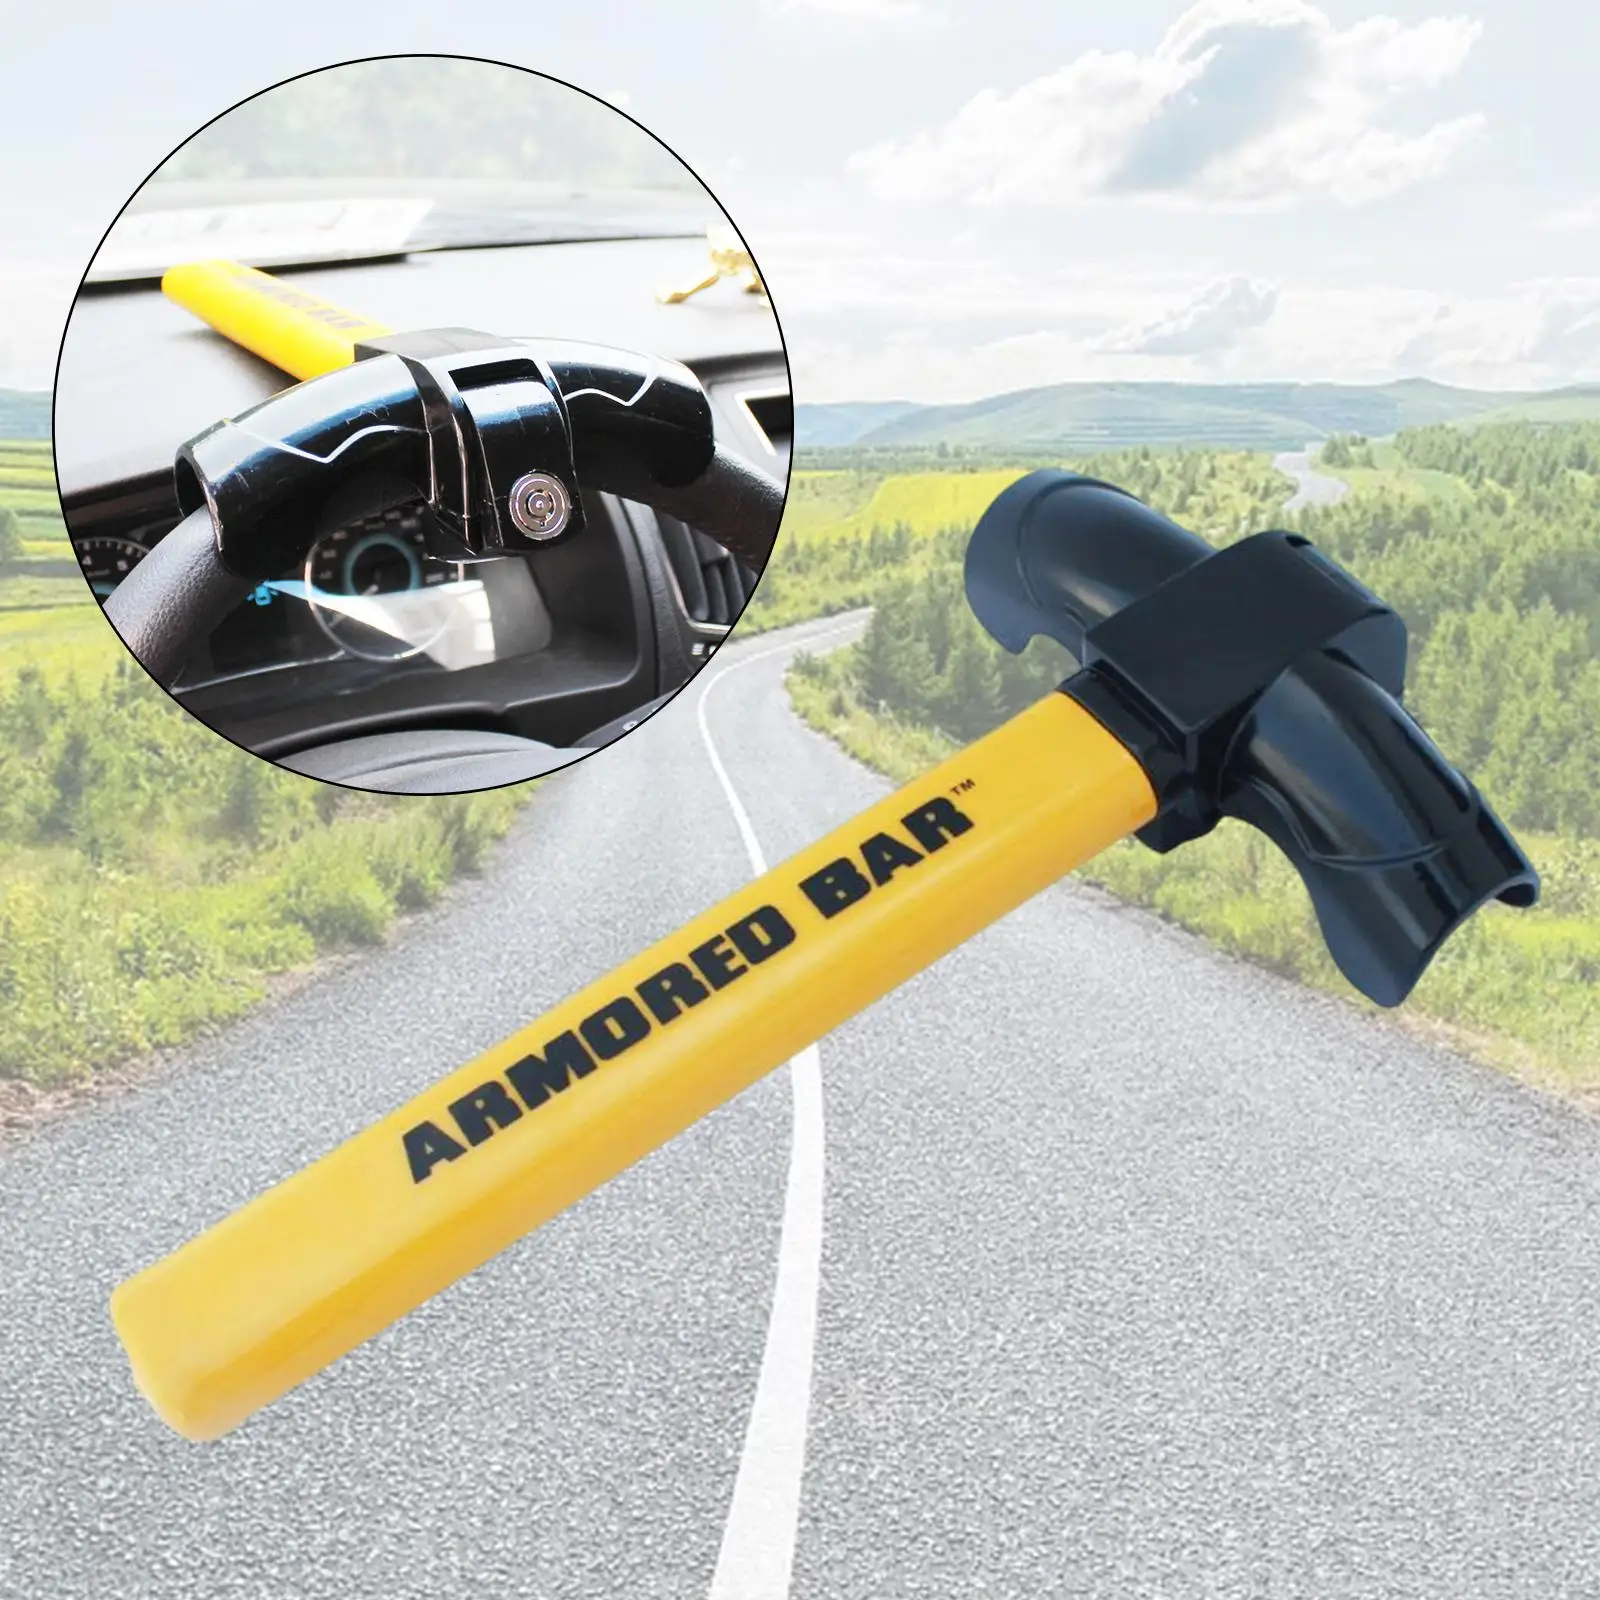 Car Steering Wheel Lock with 2Pcs Keys Sturdy Stainless Steel Universal Anti Theft Convenient Heavy Duty for Van Cars Truck